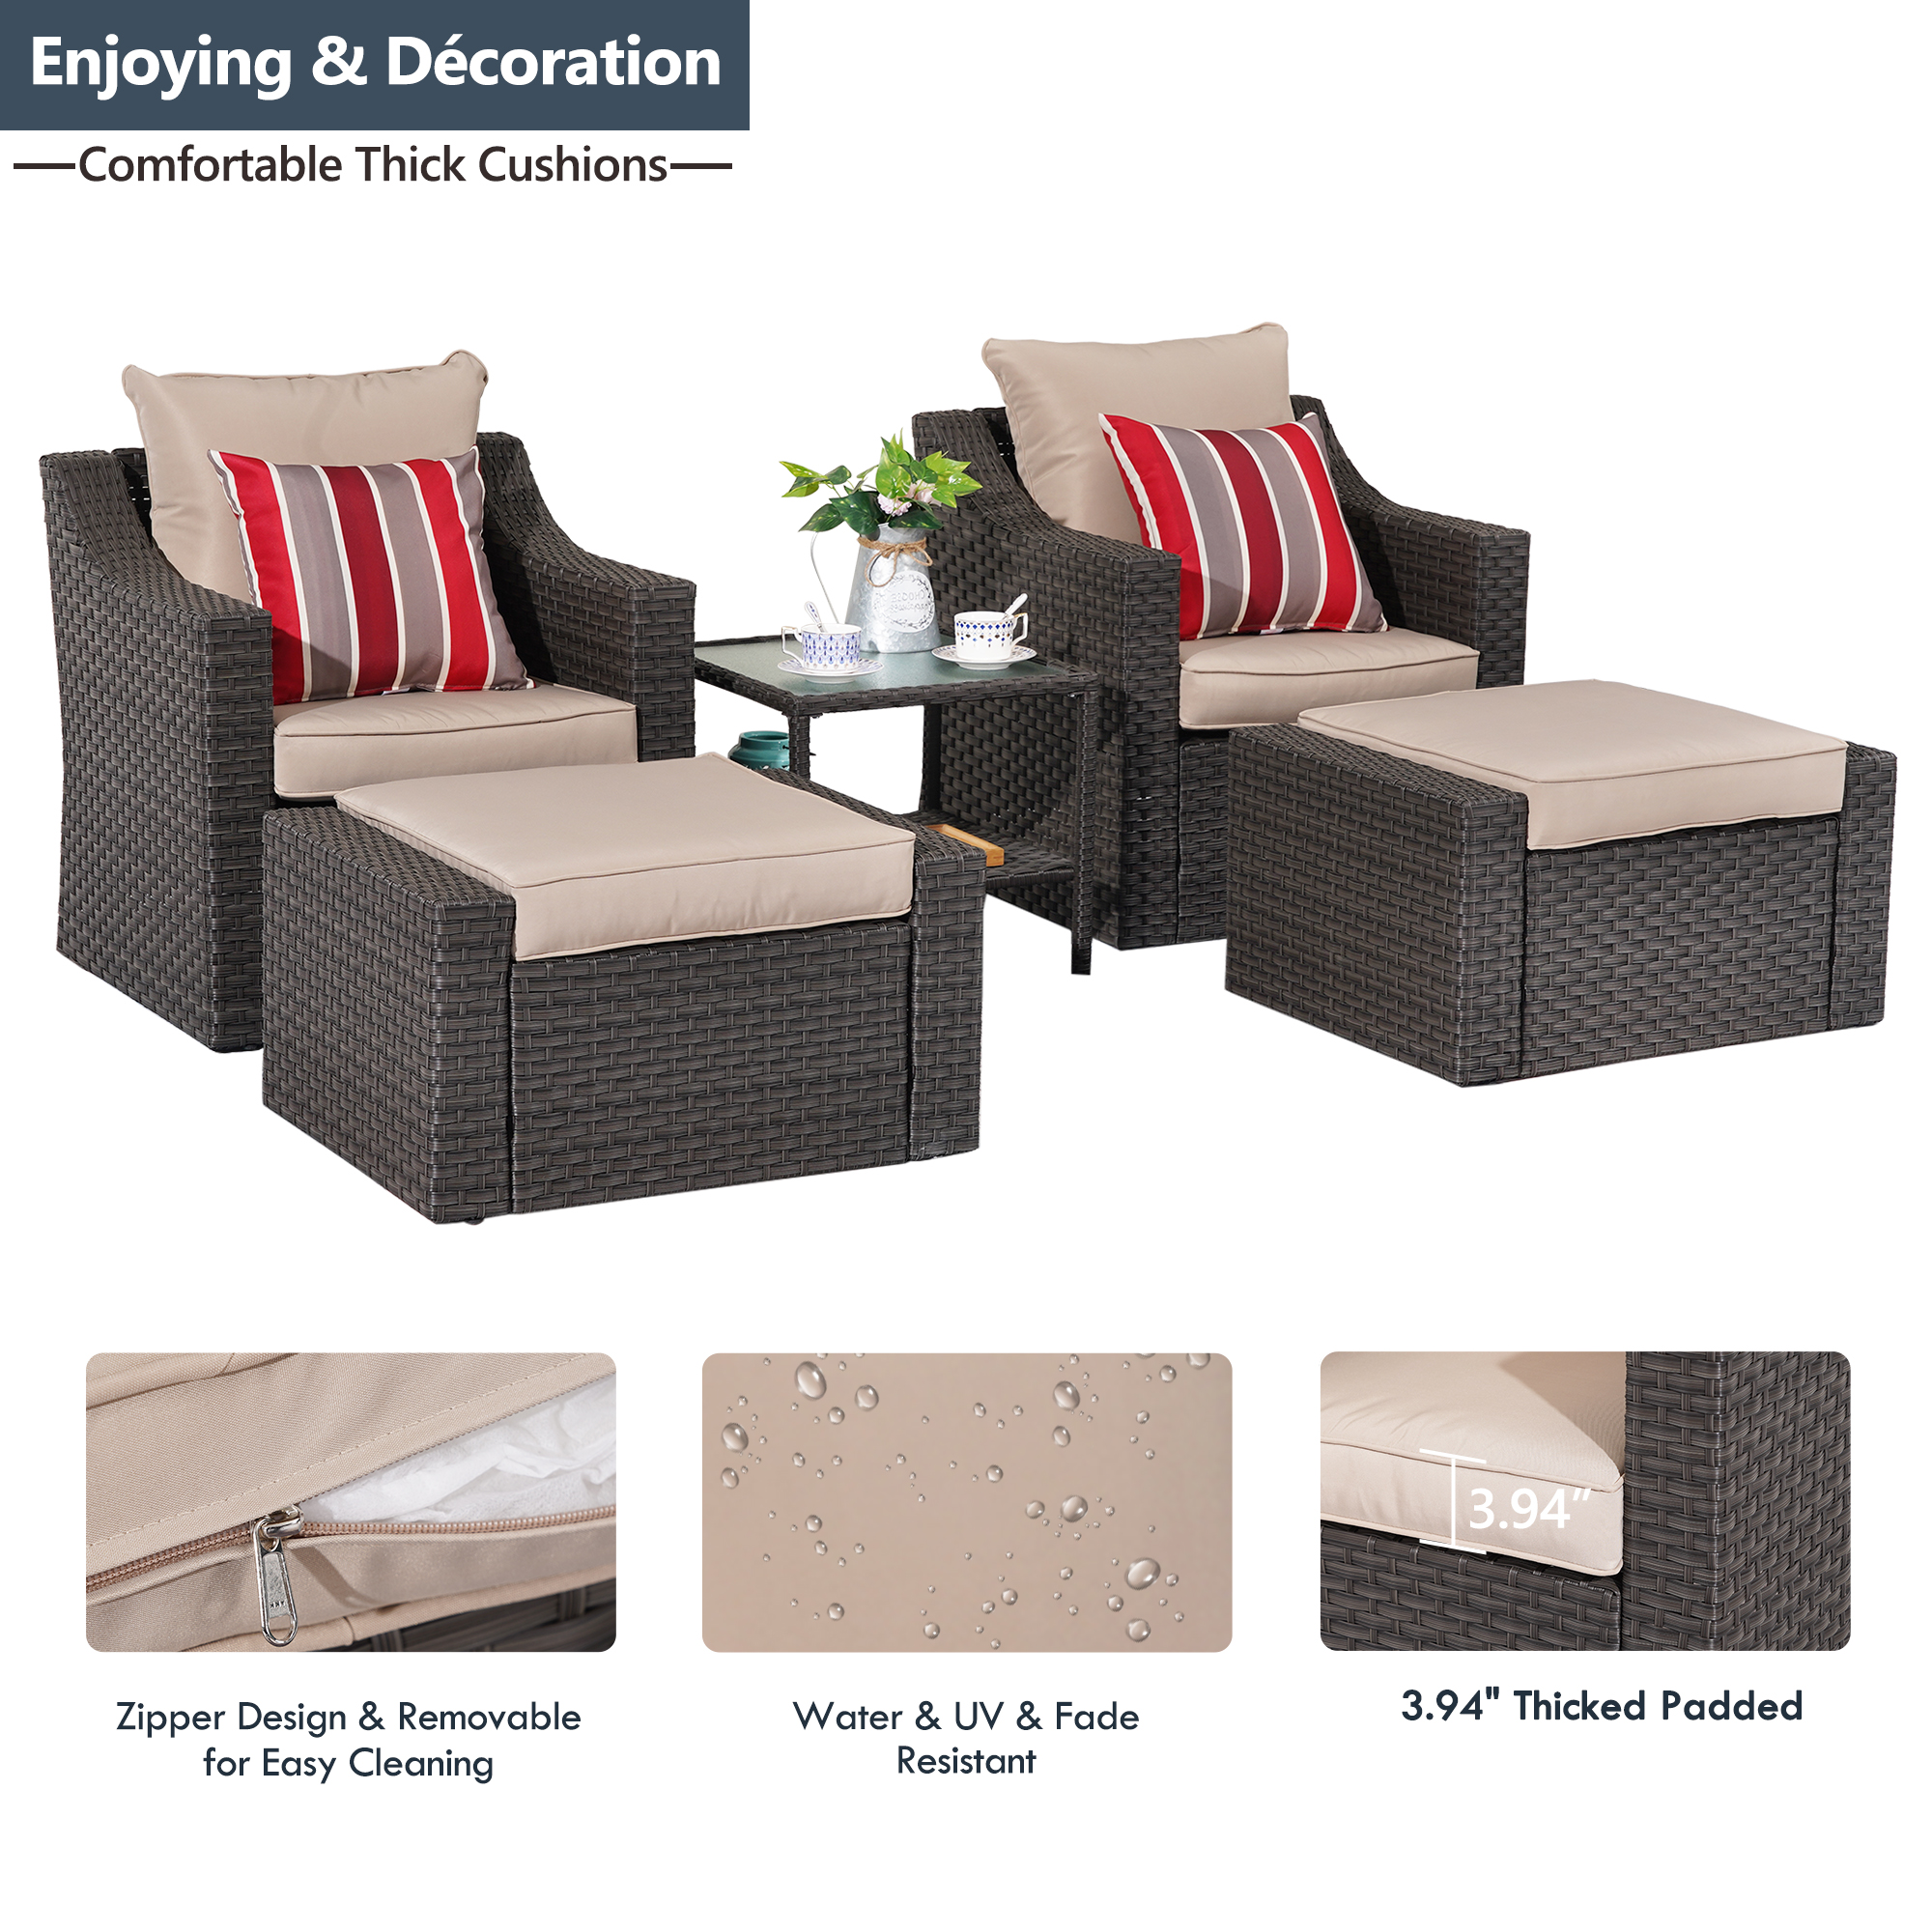 Superjoe 5 Pcs Patio Furniture Sets Outdoor Wicker Lounge Chair with Ottomans and Coffee Table, Khaki - image 3 of 6